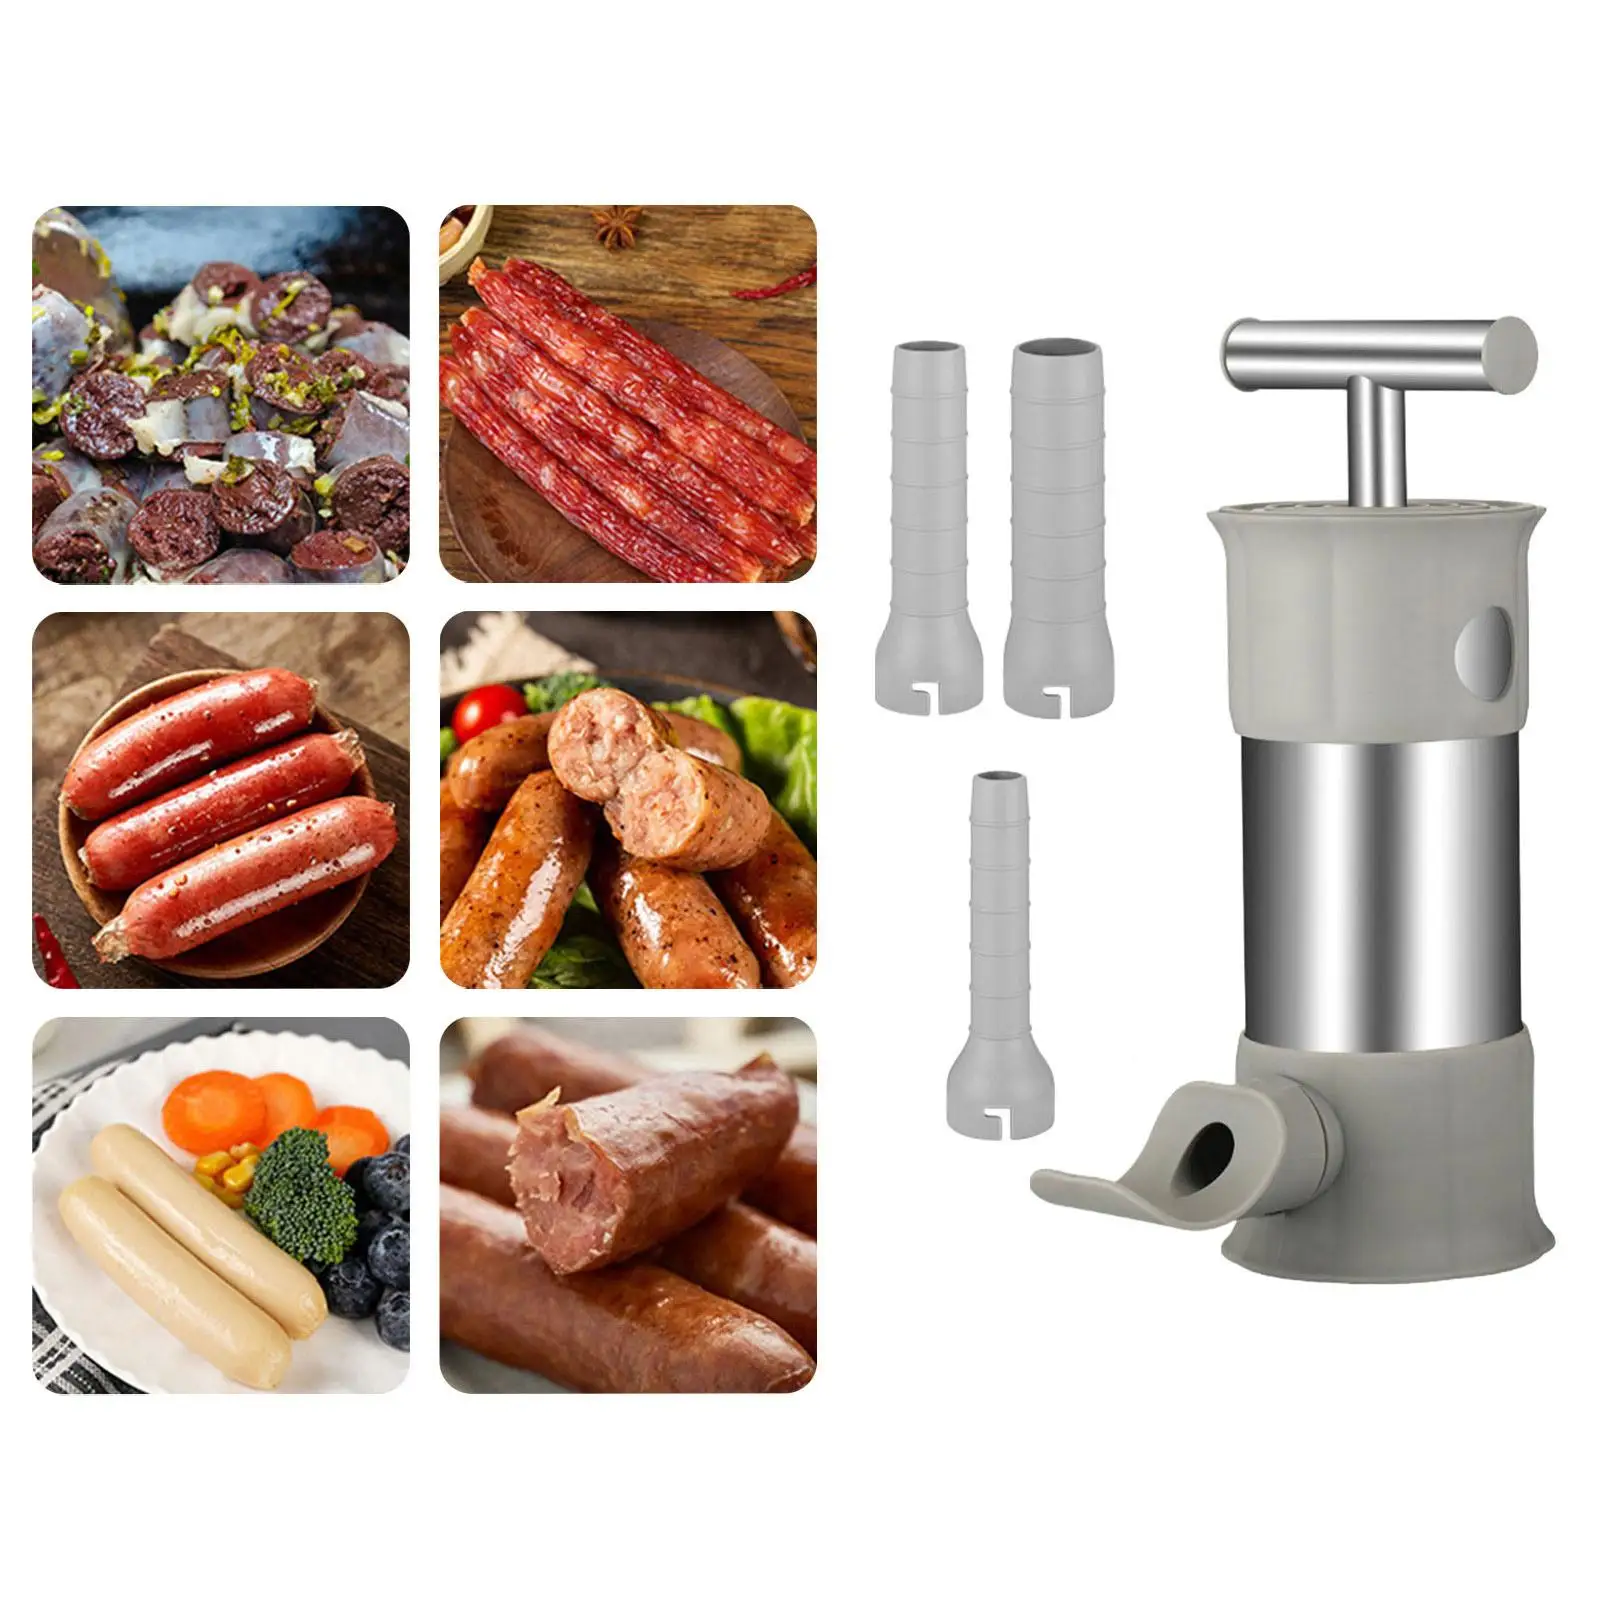 Sausage Filling Tools Multipurpose for Homemade with 4 Nozzle Attachments Stuffing Tubes Meat Grinder Meat Sausage Machine